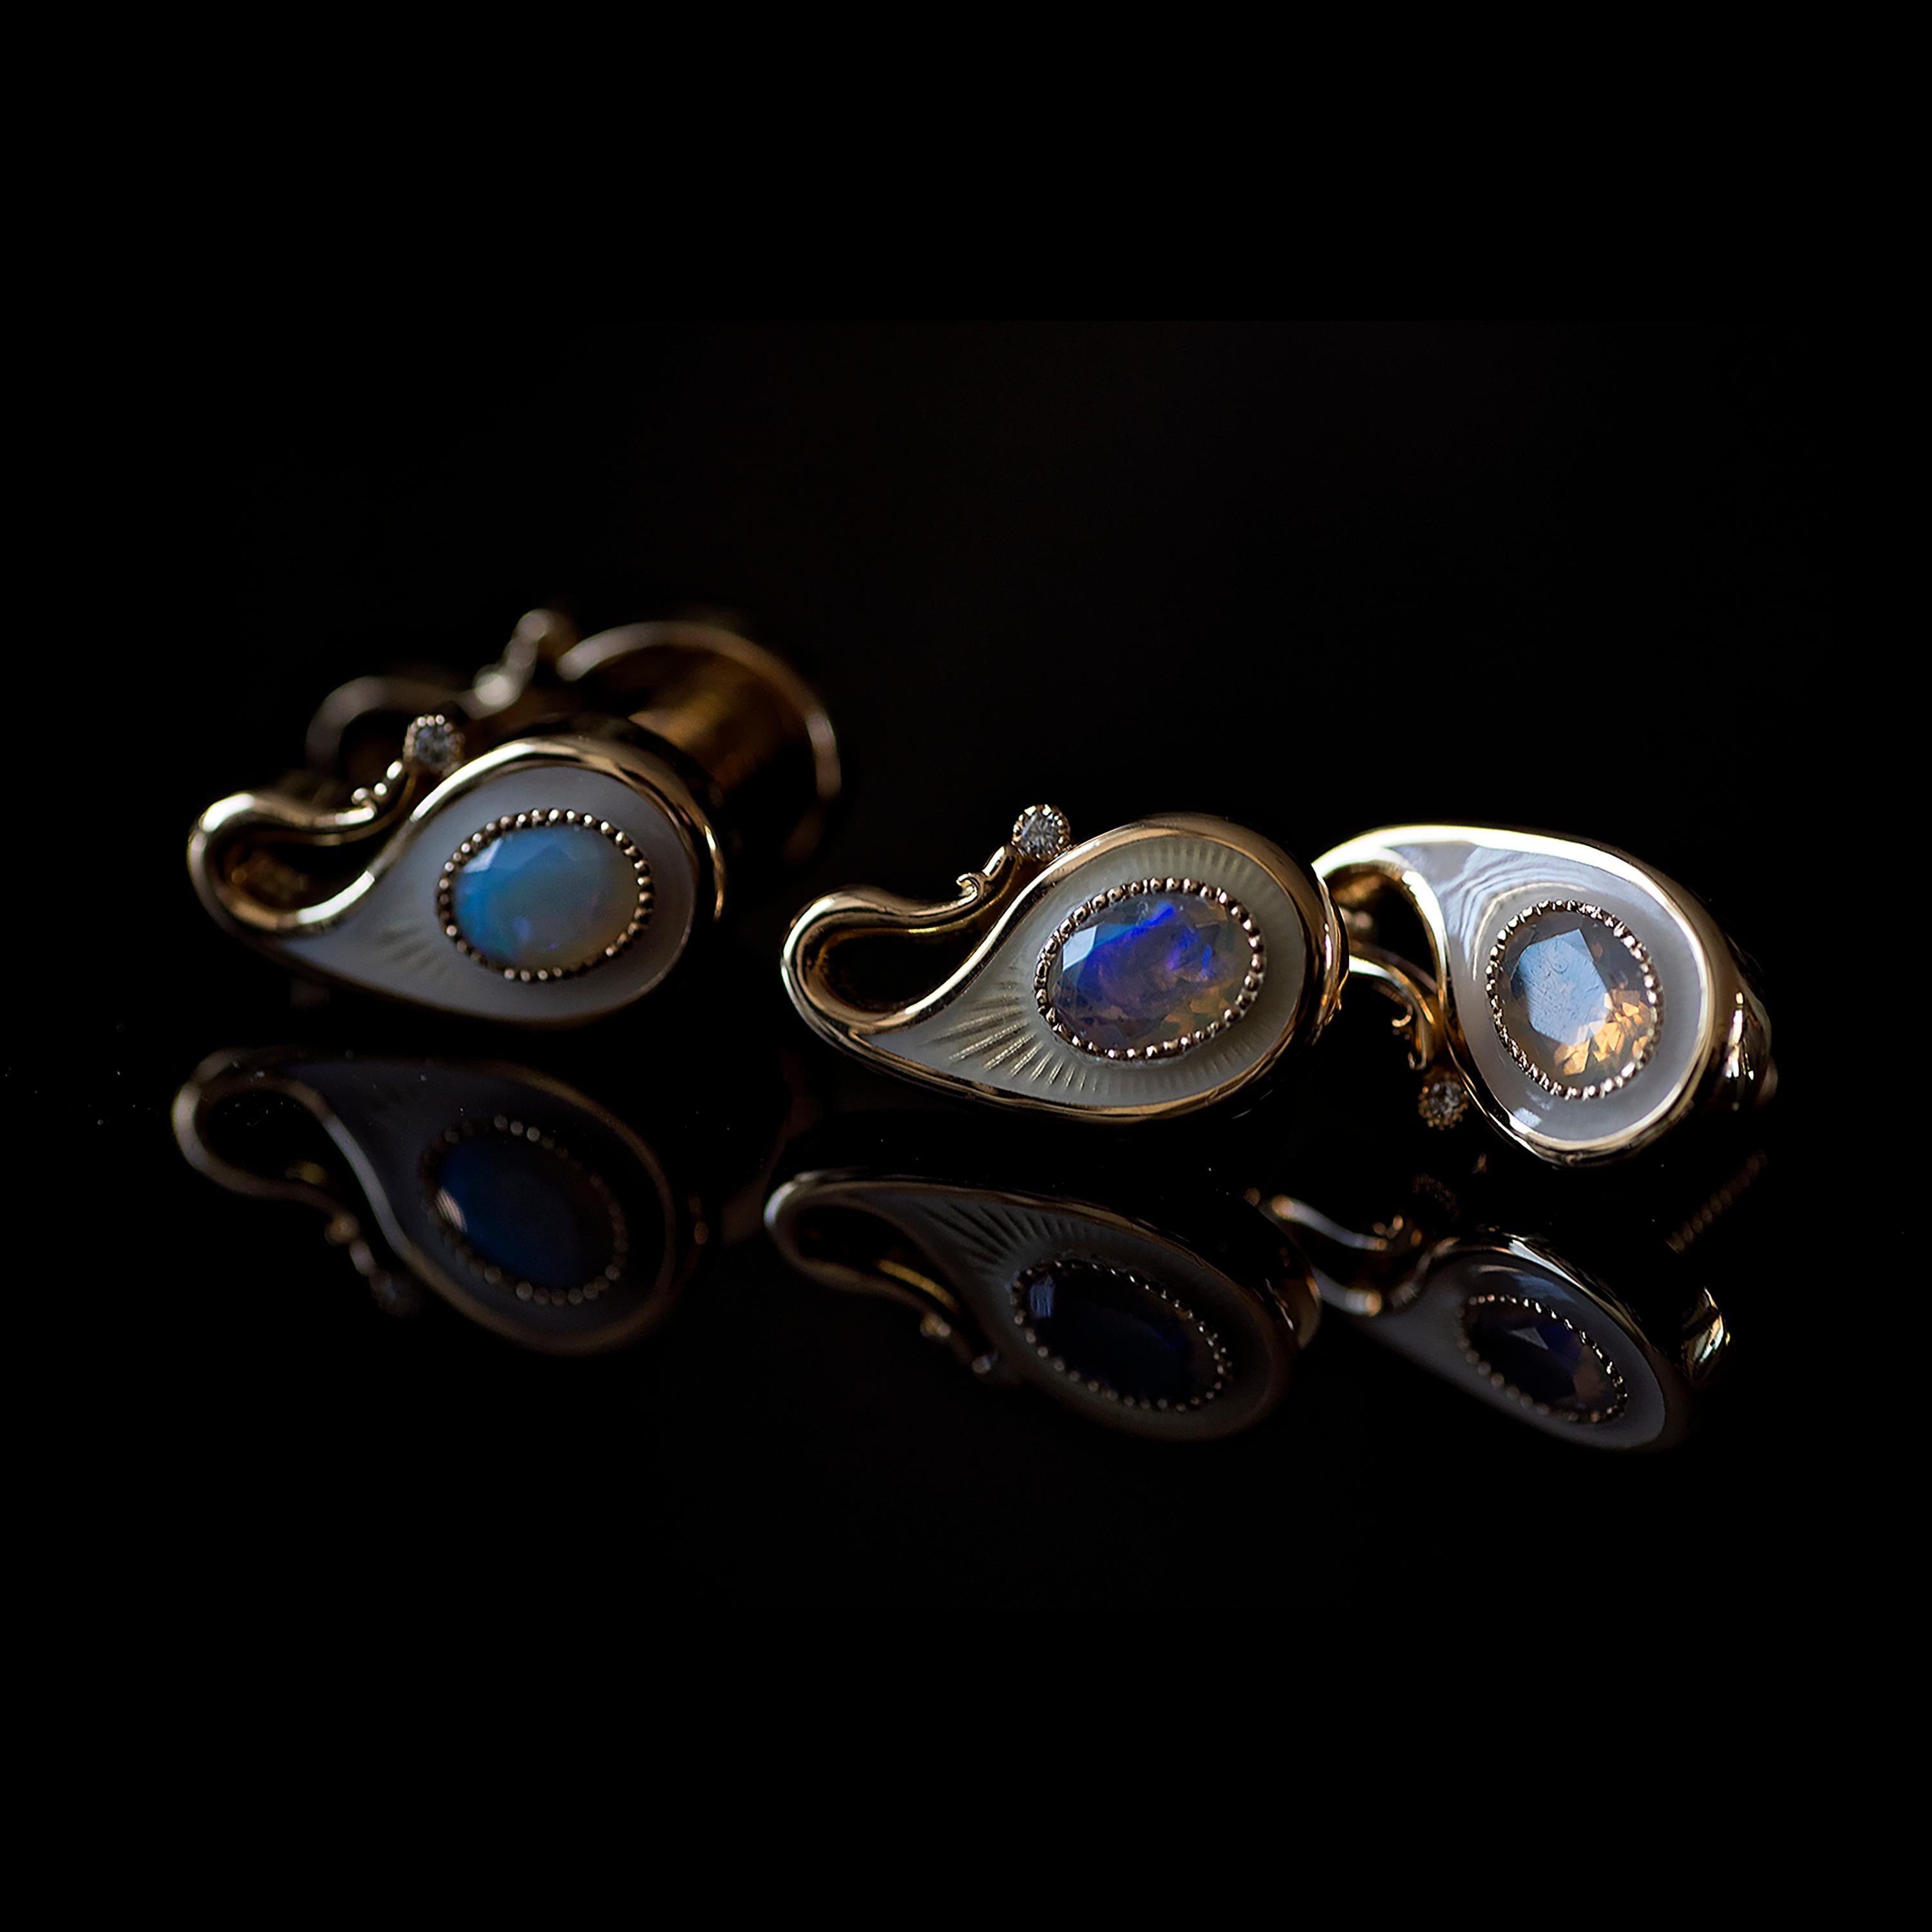 These luxurious 18K solid gold cufflinks are double-sided, set with opals and diamonds, and finished with milky white guilloche enamel. Two parts connect to each other via a custom gold screw mechanism. Paisley symbol reminds the wearer of the